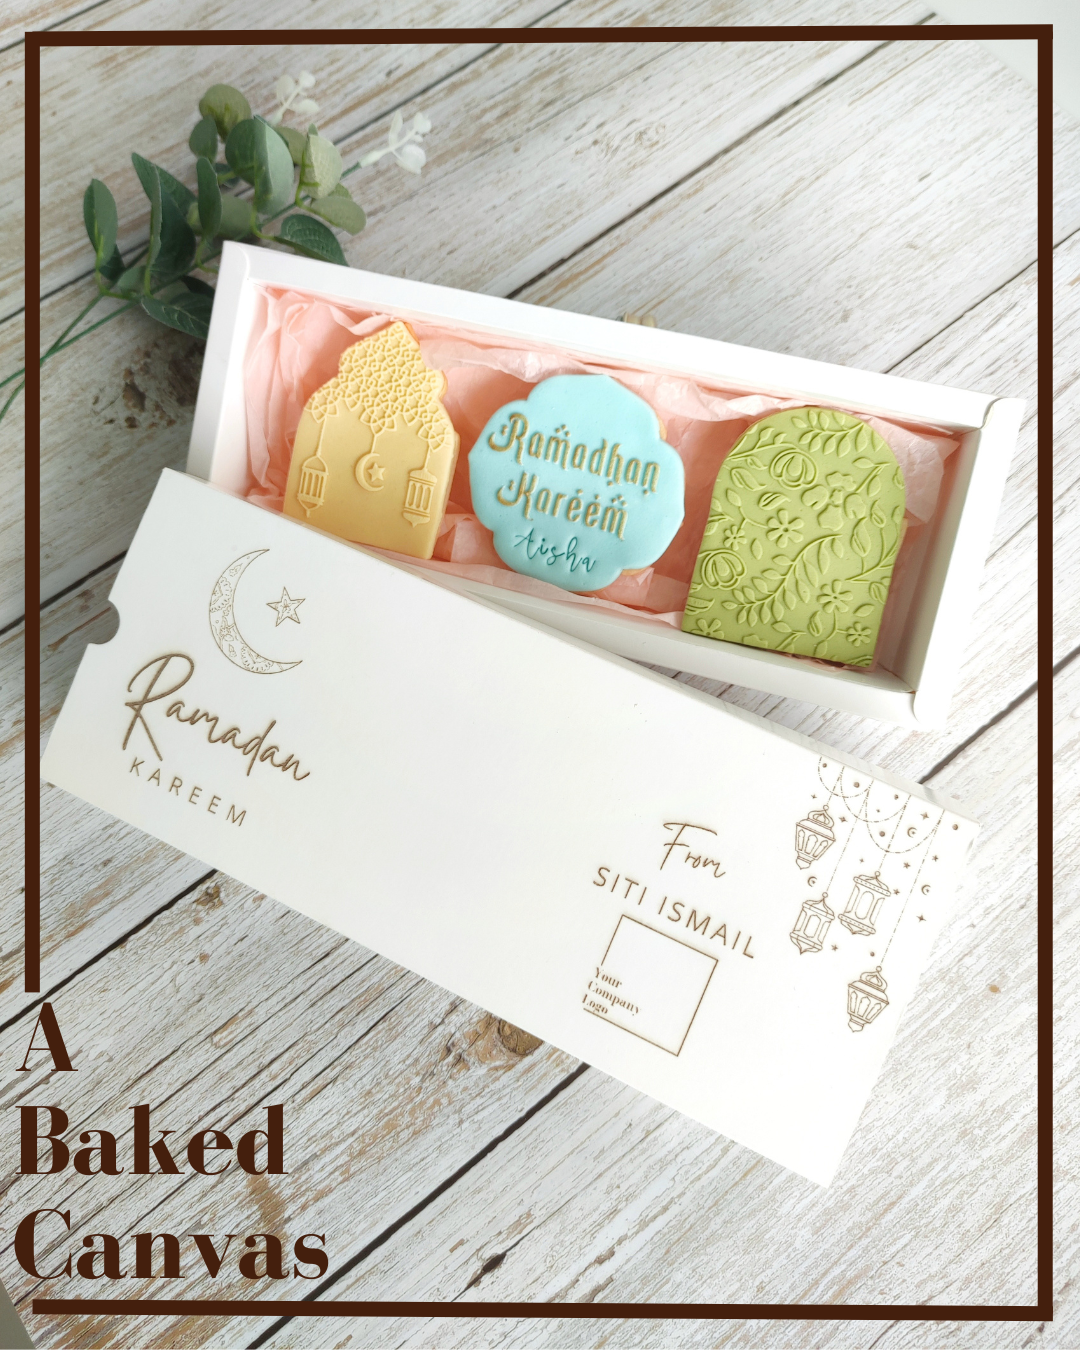 Ramadan cookie box triple by A baked canvas KL